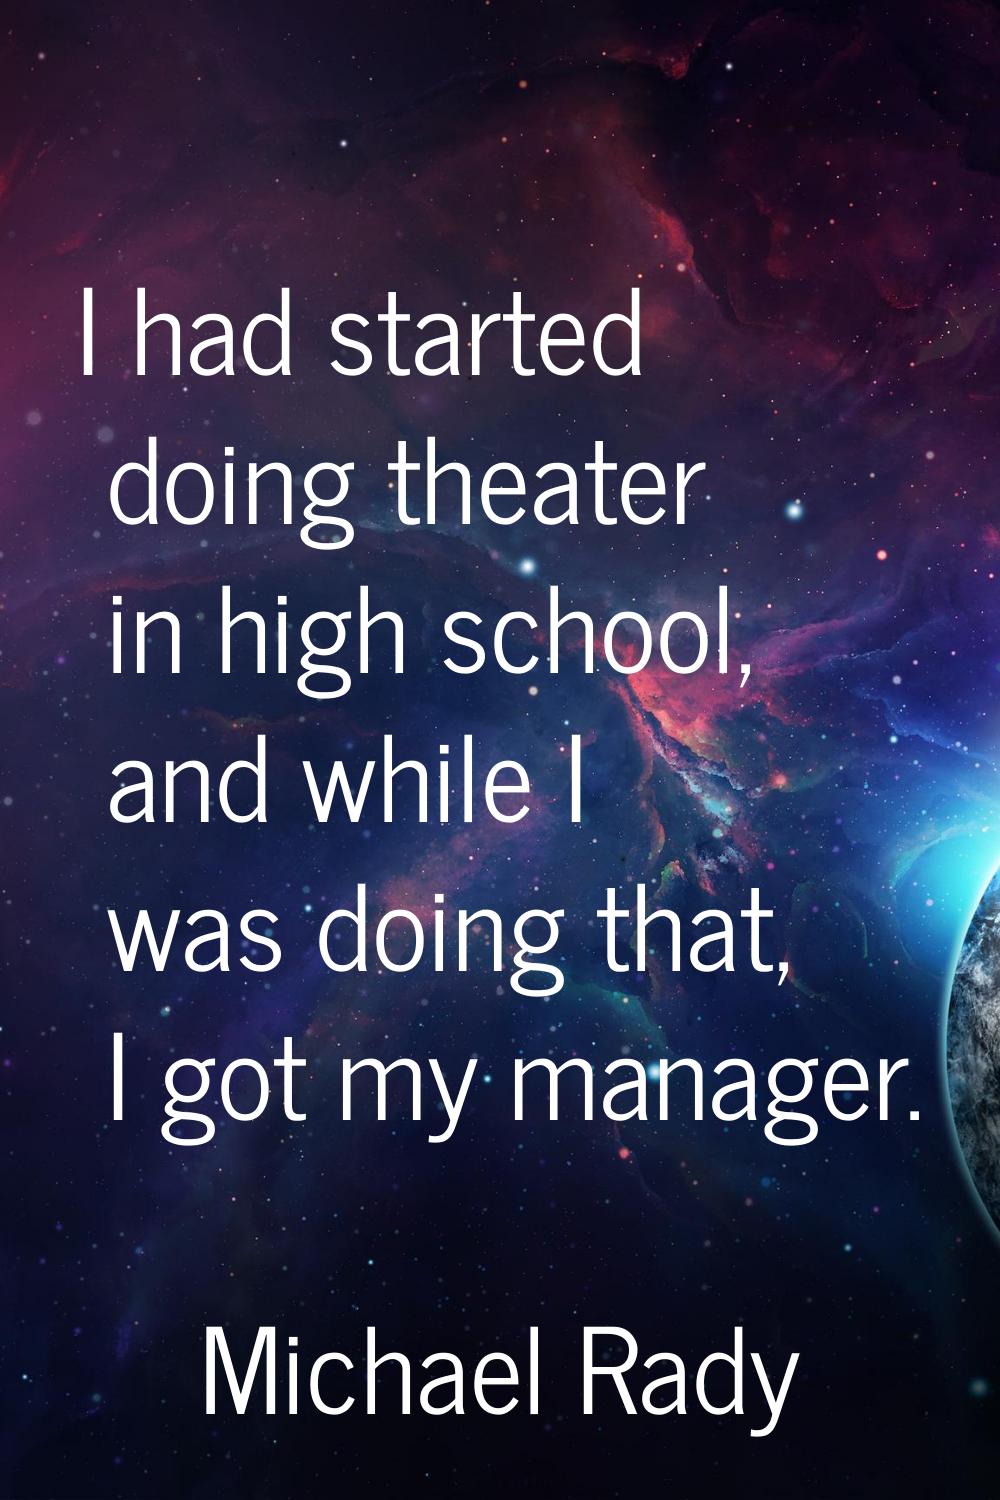 I had started doing theater in high school, and while I was doing that, I got my manager.